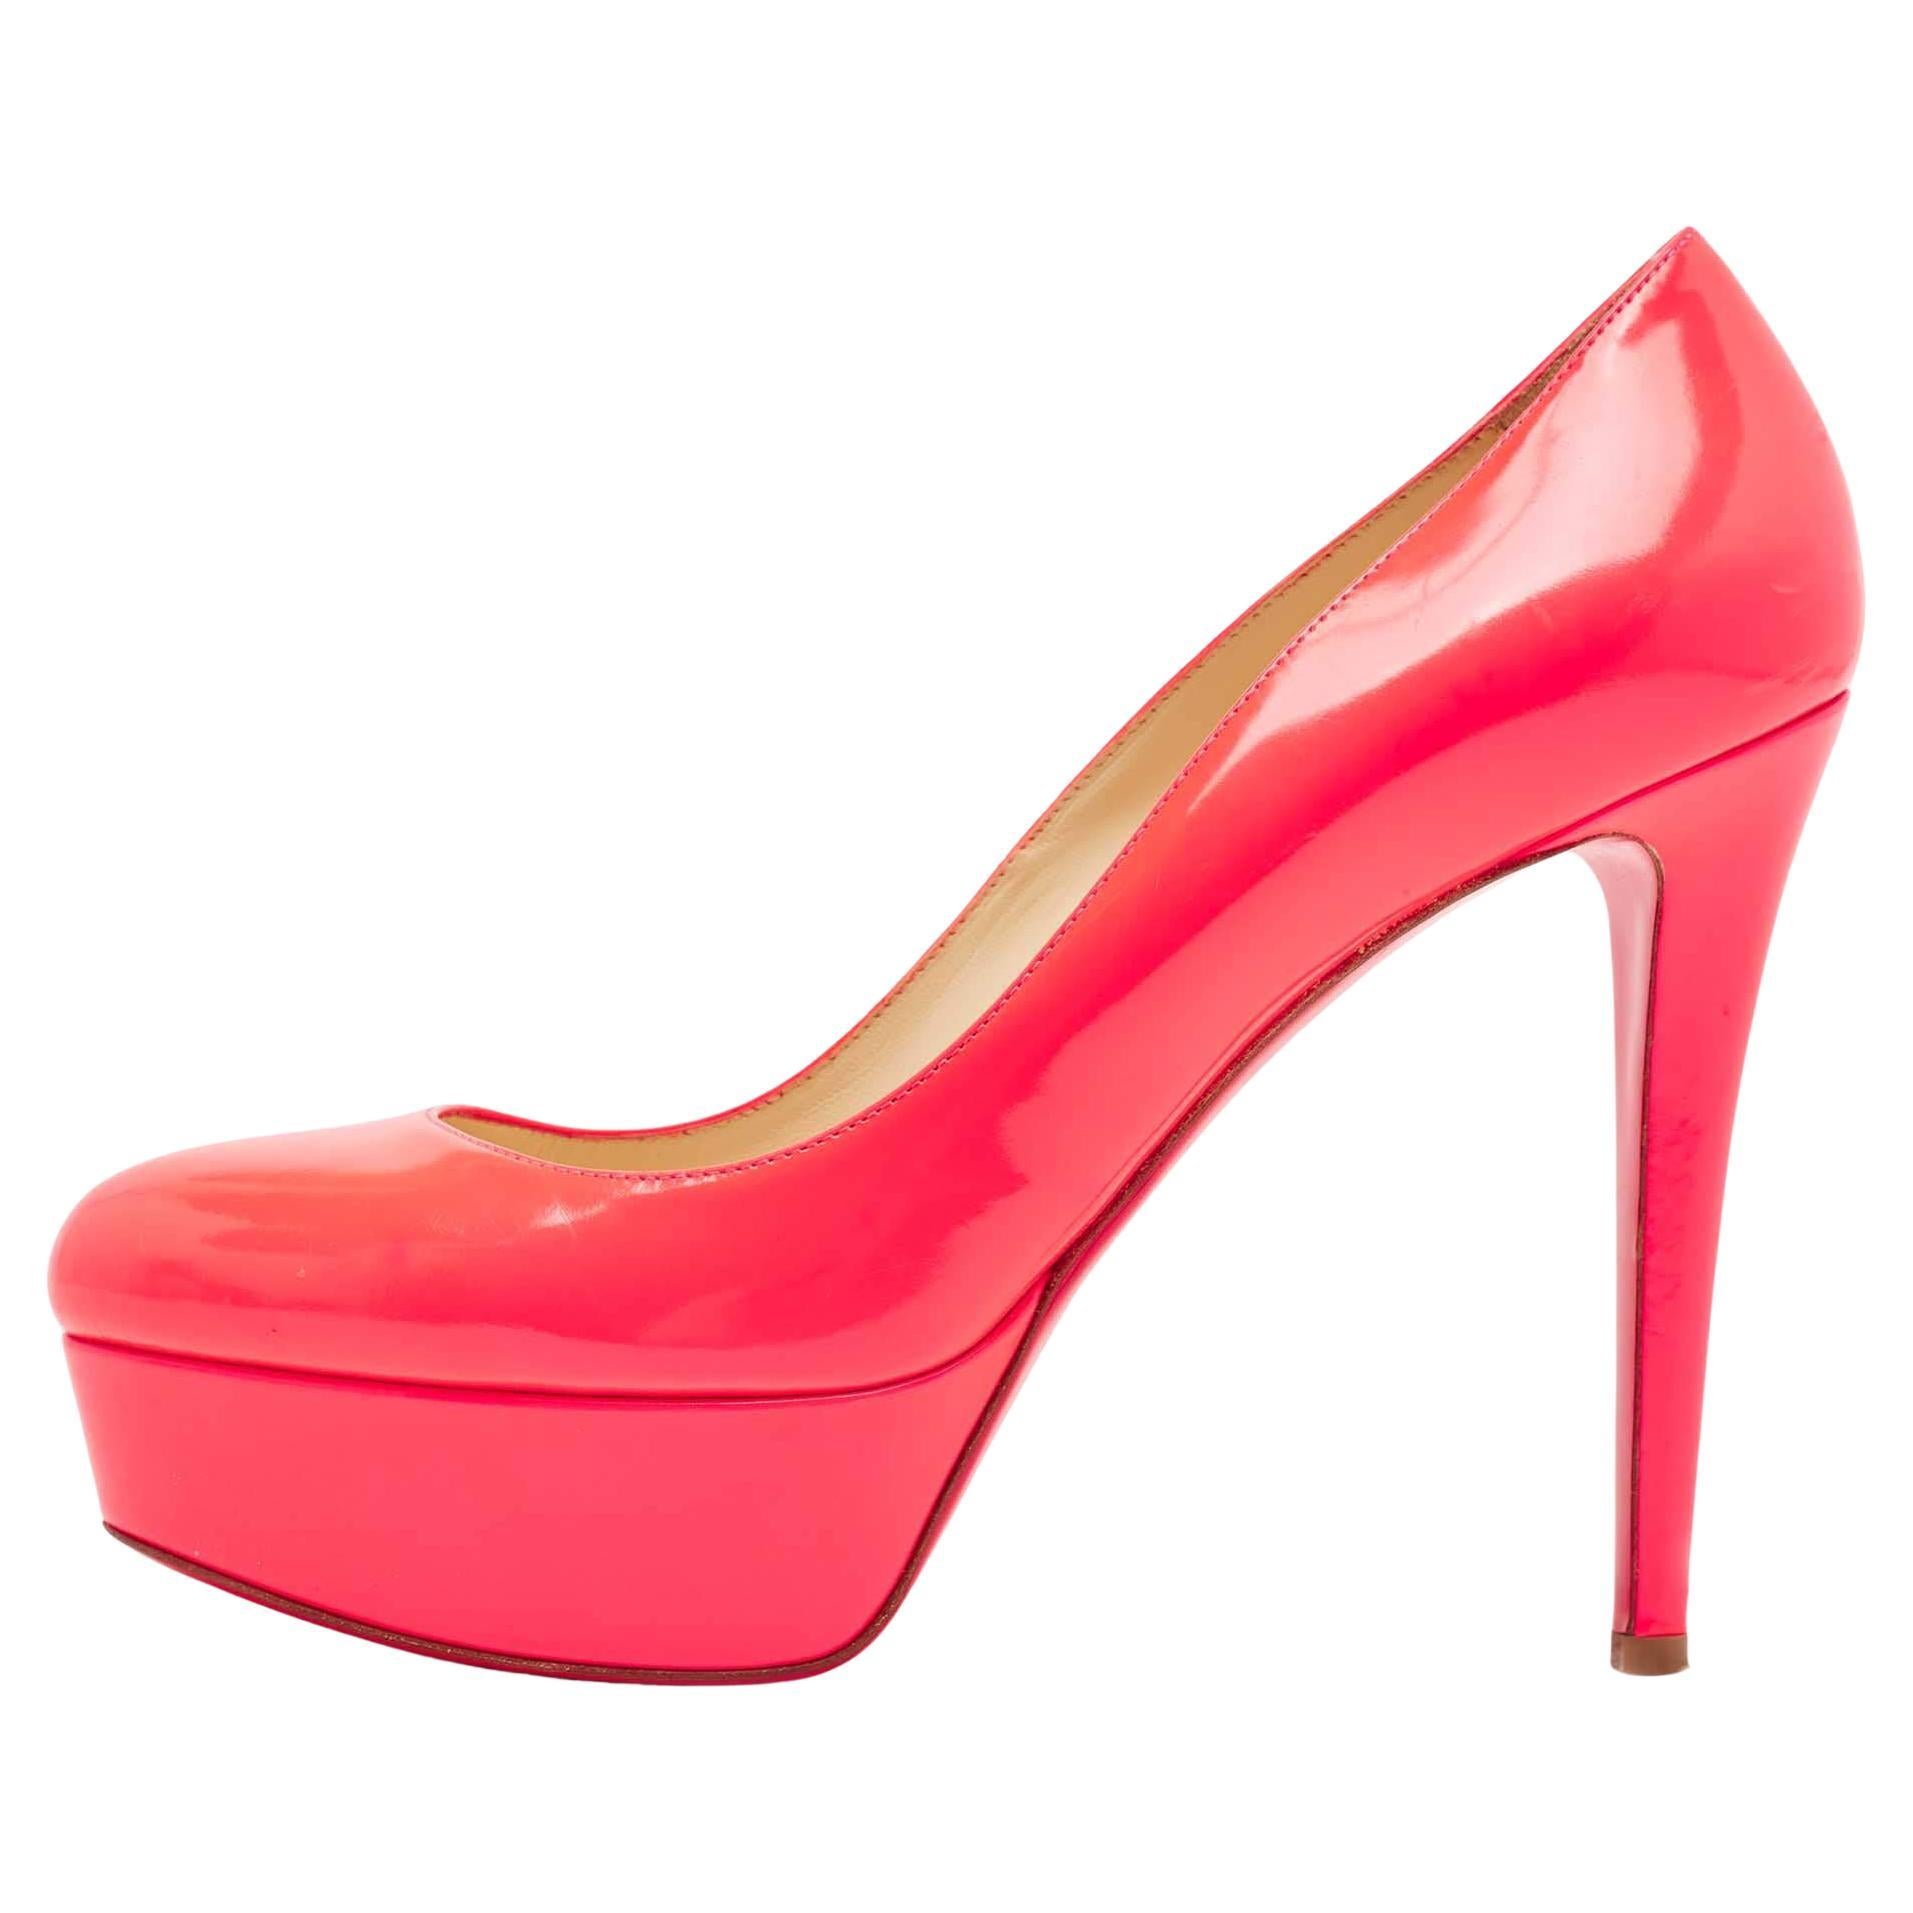 Christian Louboutin Neon Pink Leather Bianca Pumps Size 39.5 For Sale